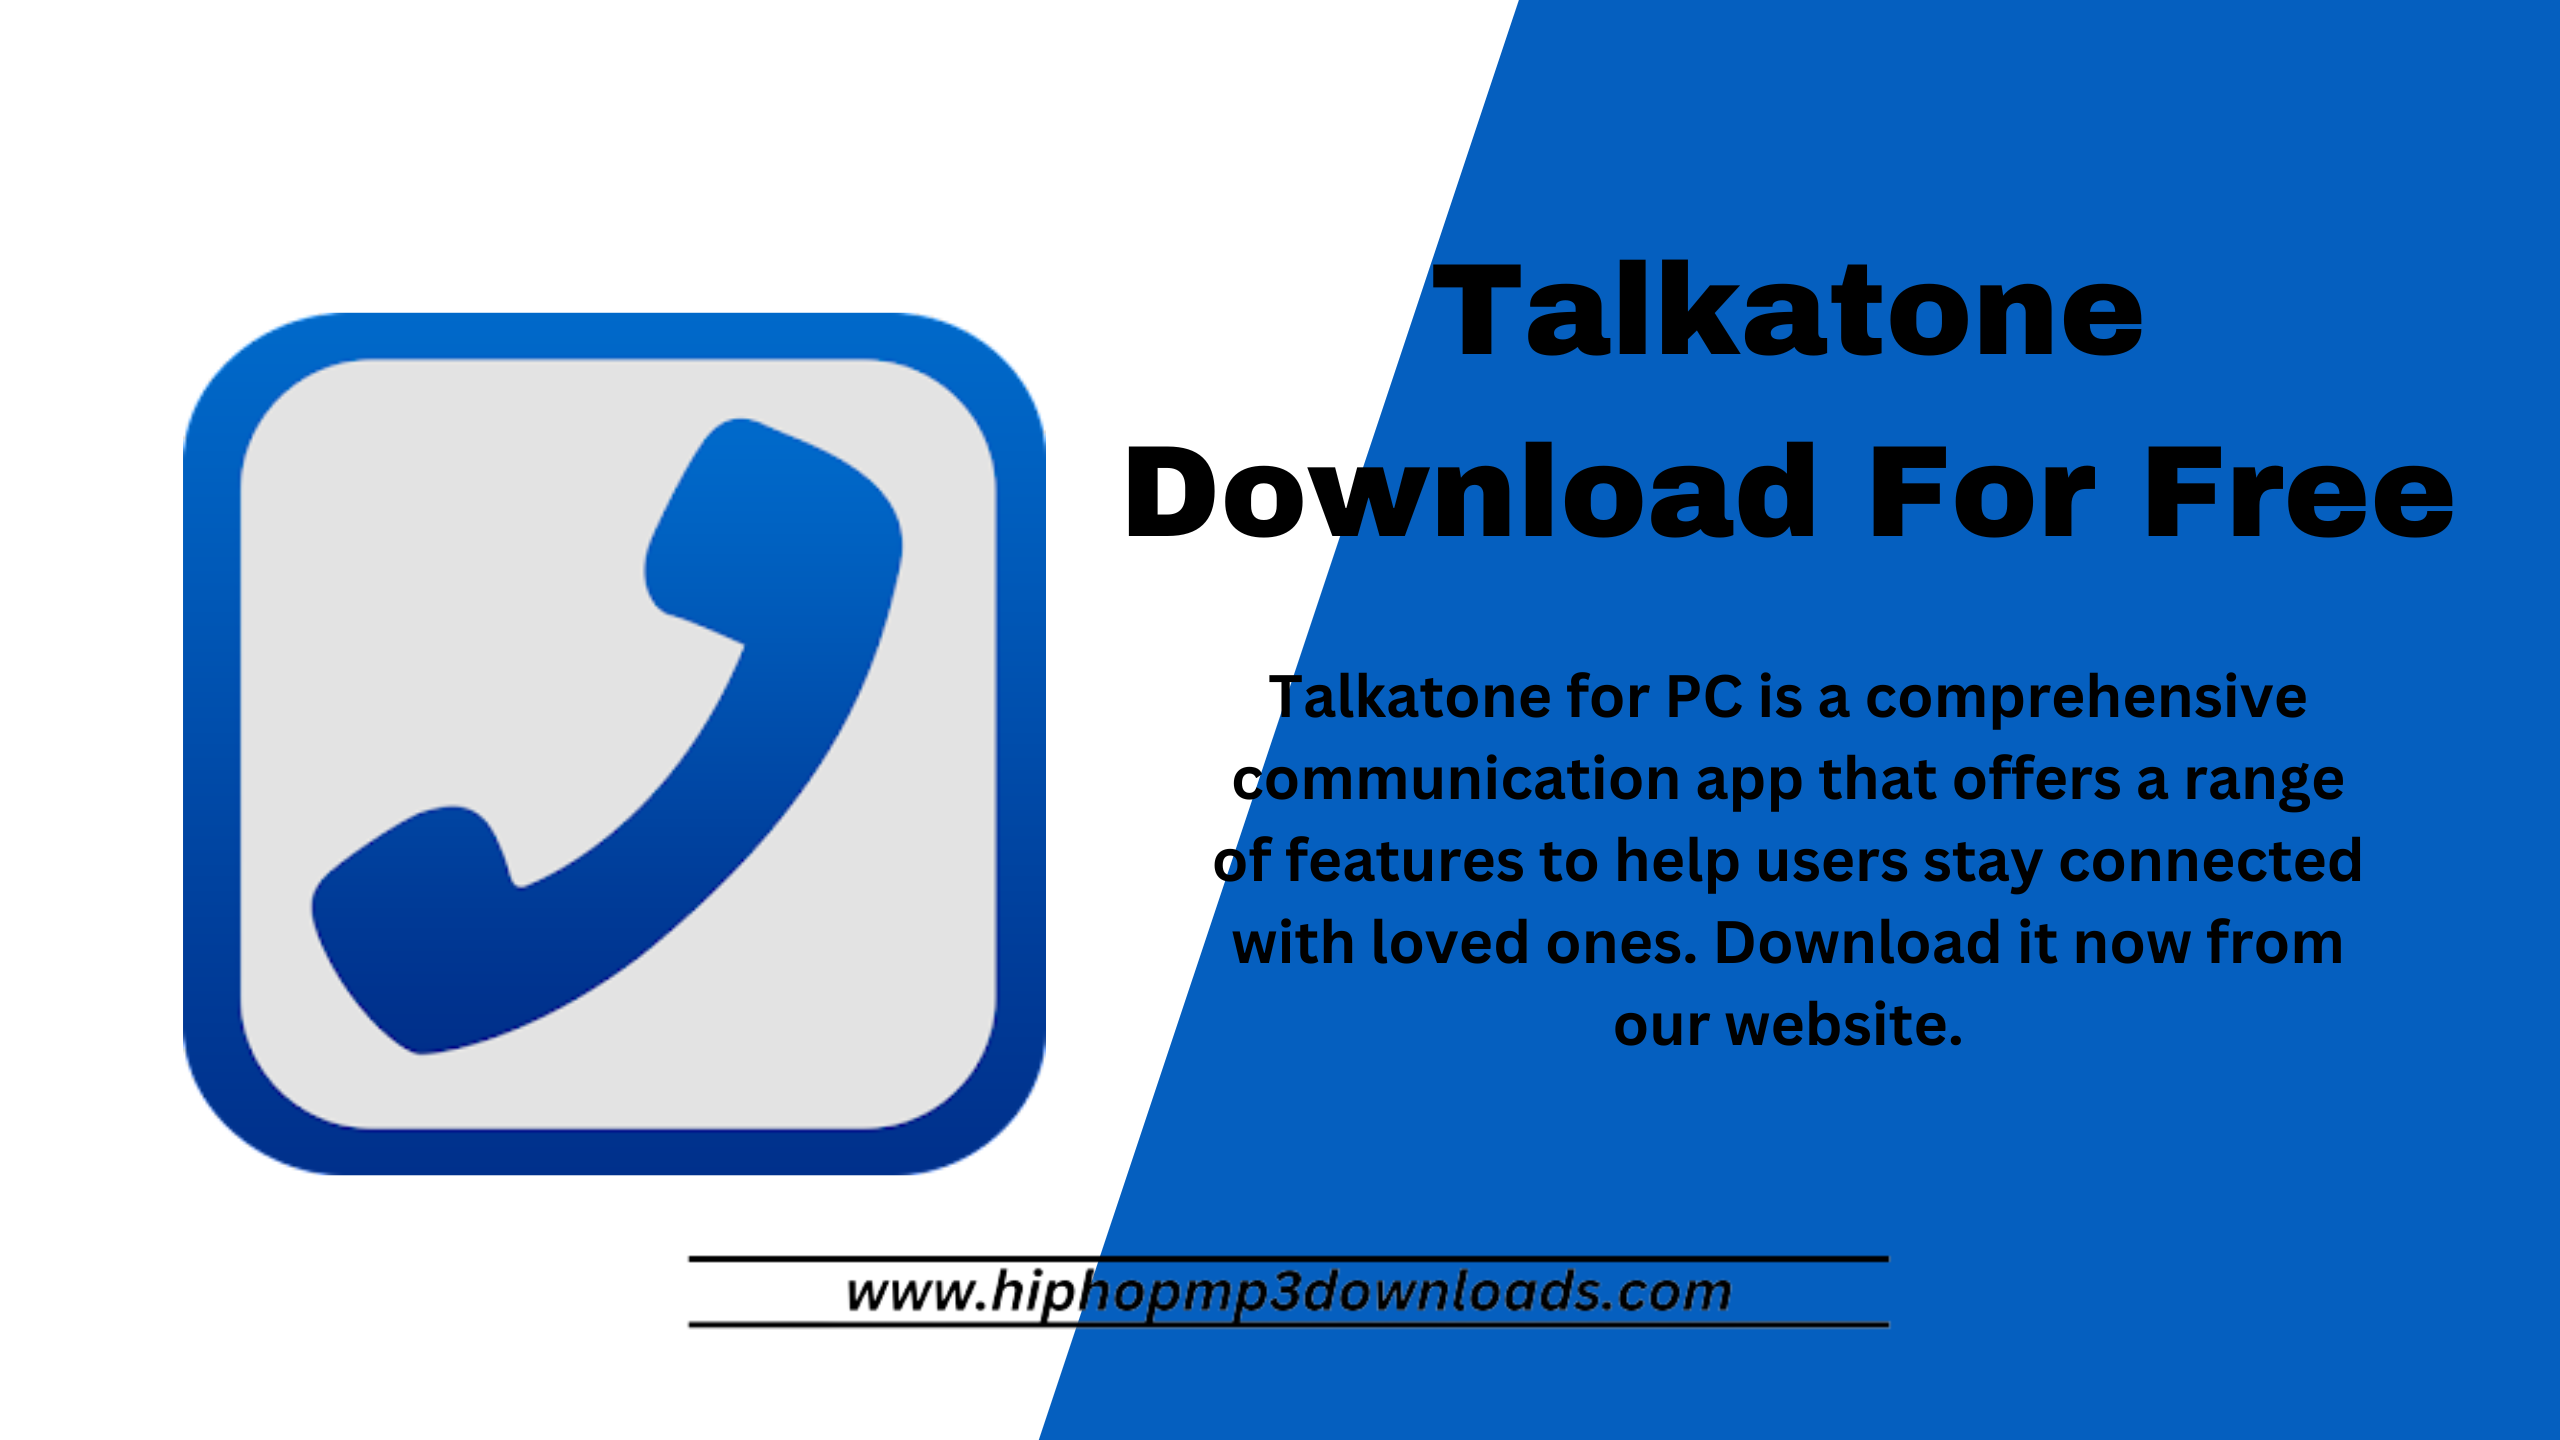 Talkatone Download For Free